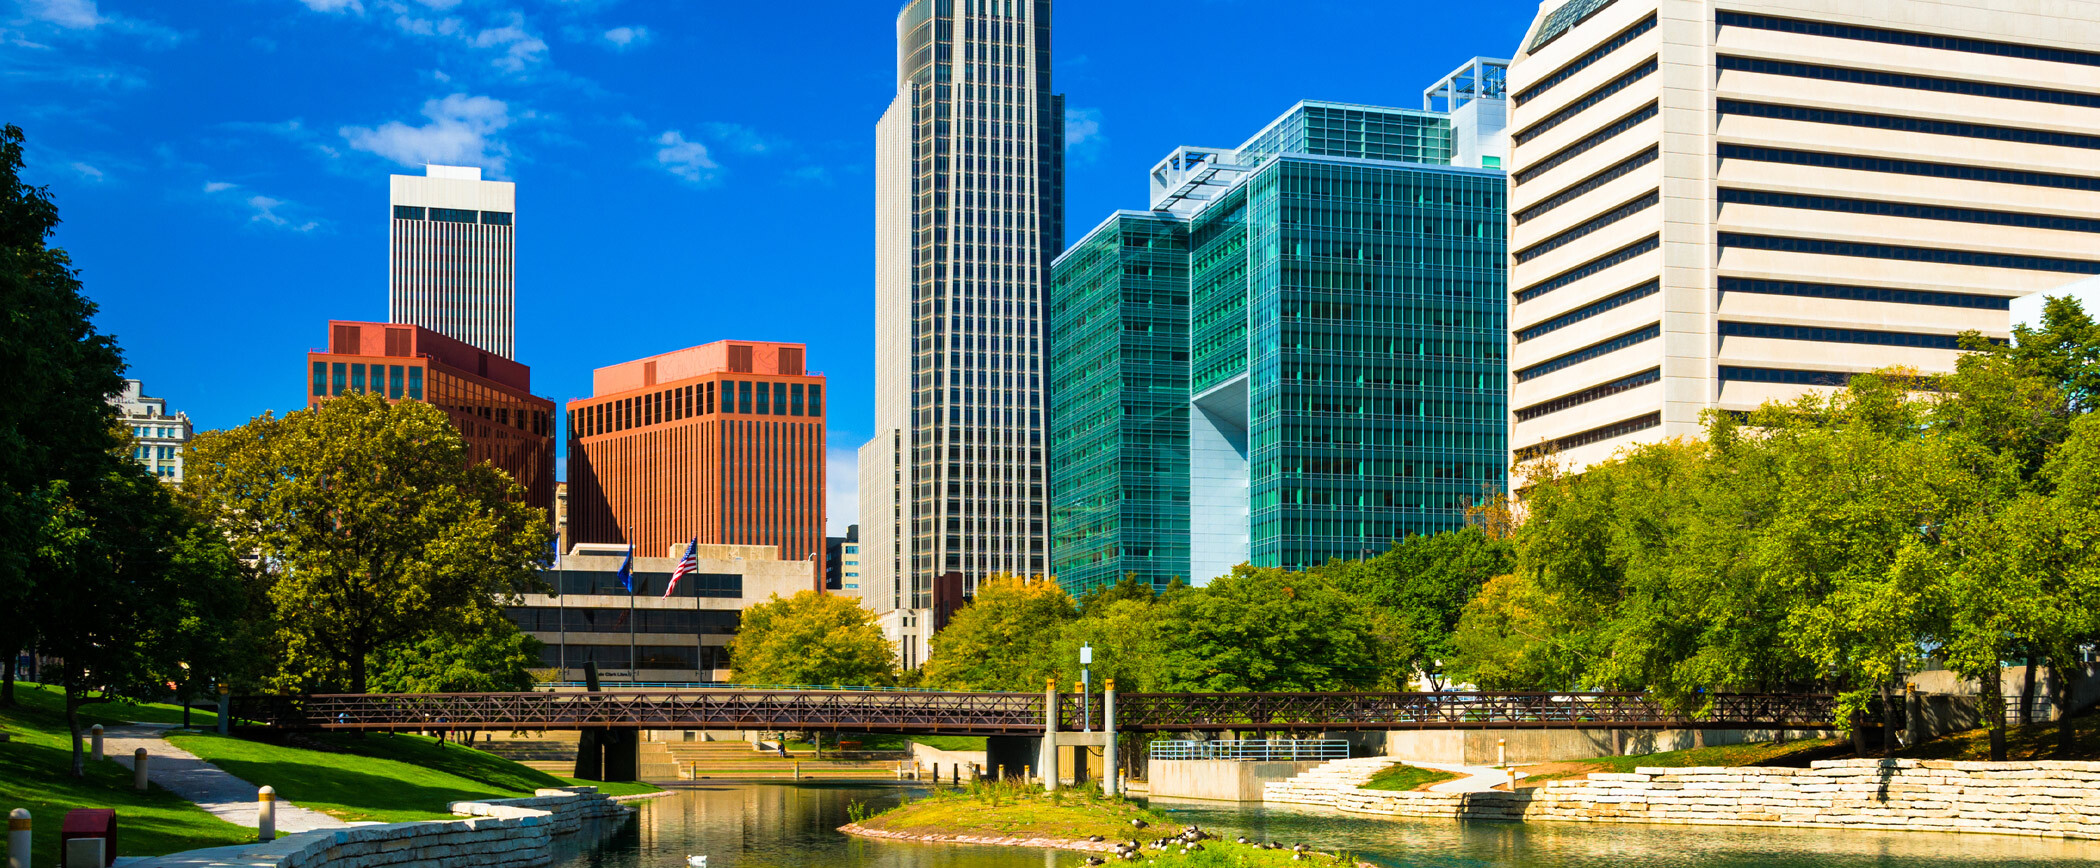 Downtown Omaha skyline with modern office buildings, a clear blue sky, and a calm river reflecting the cityscape and greenery.